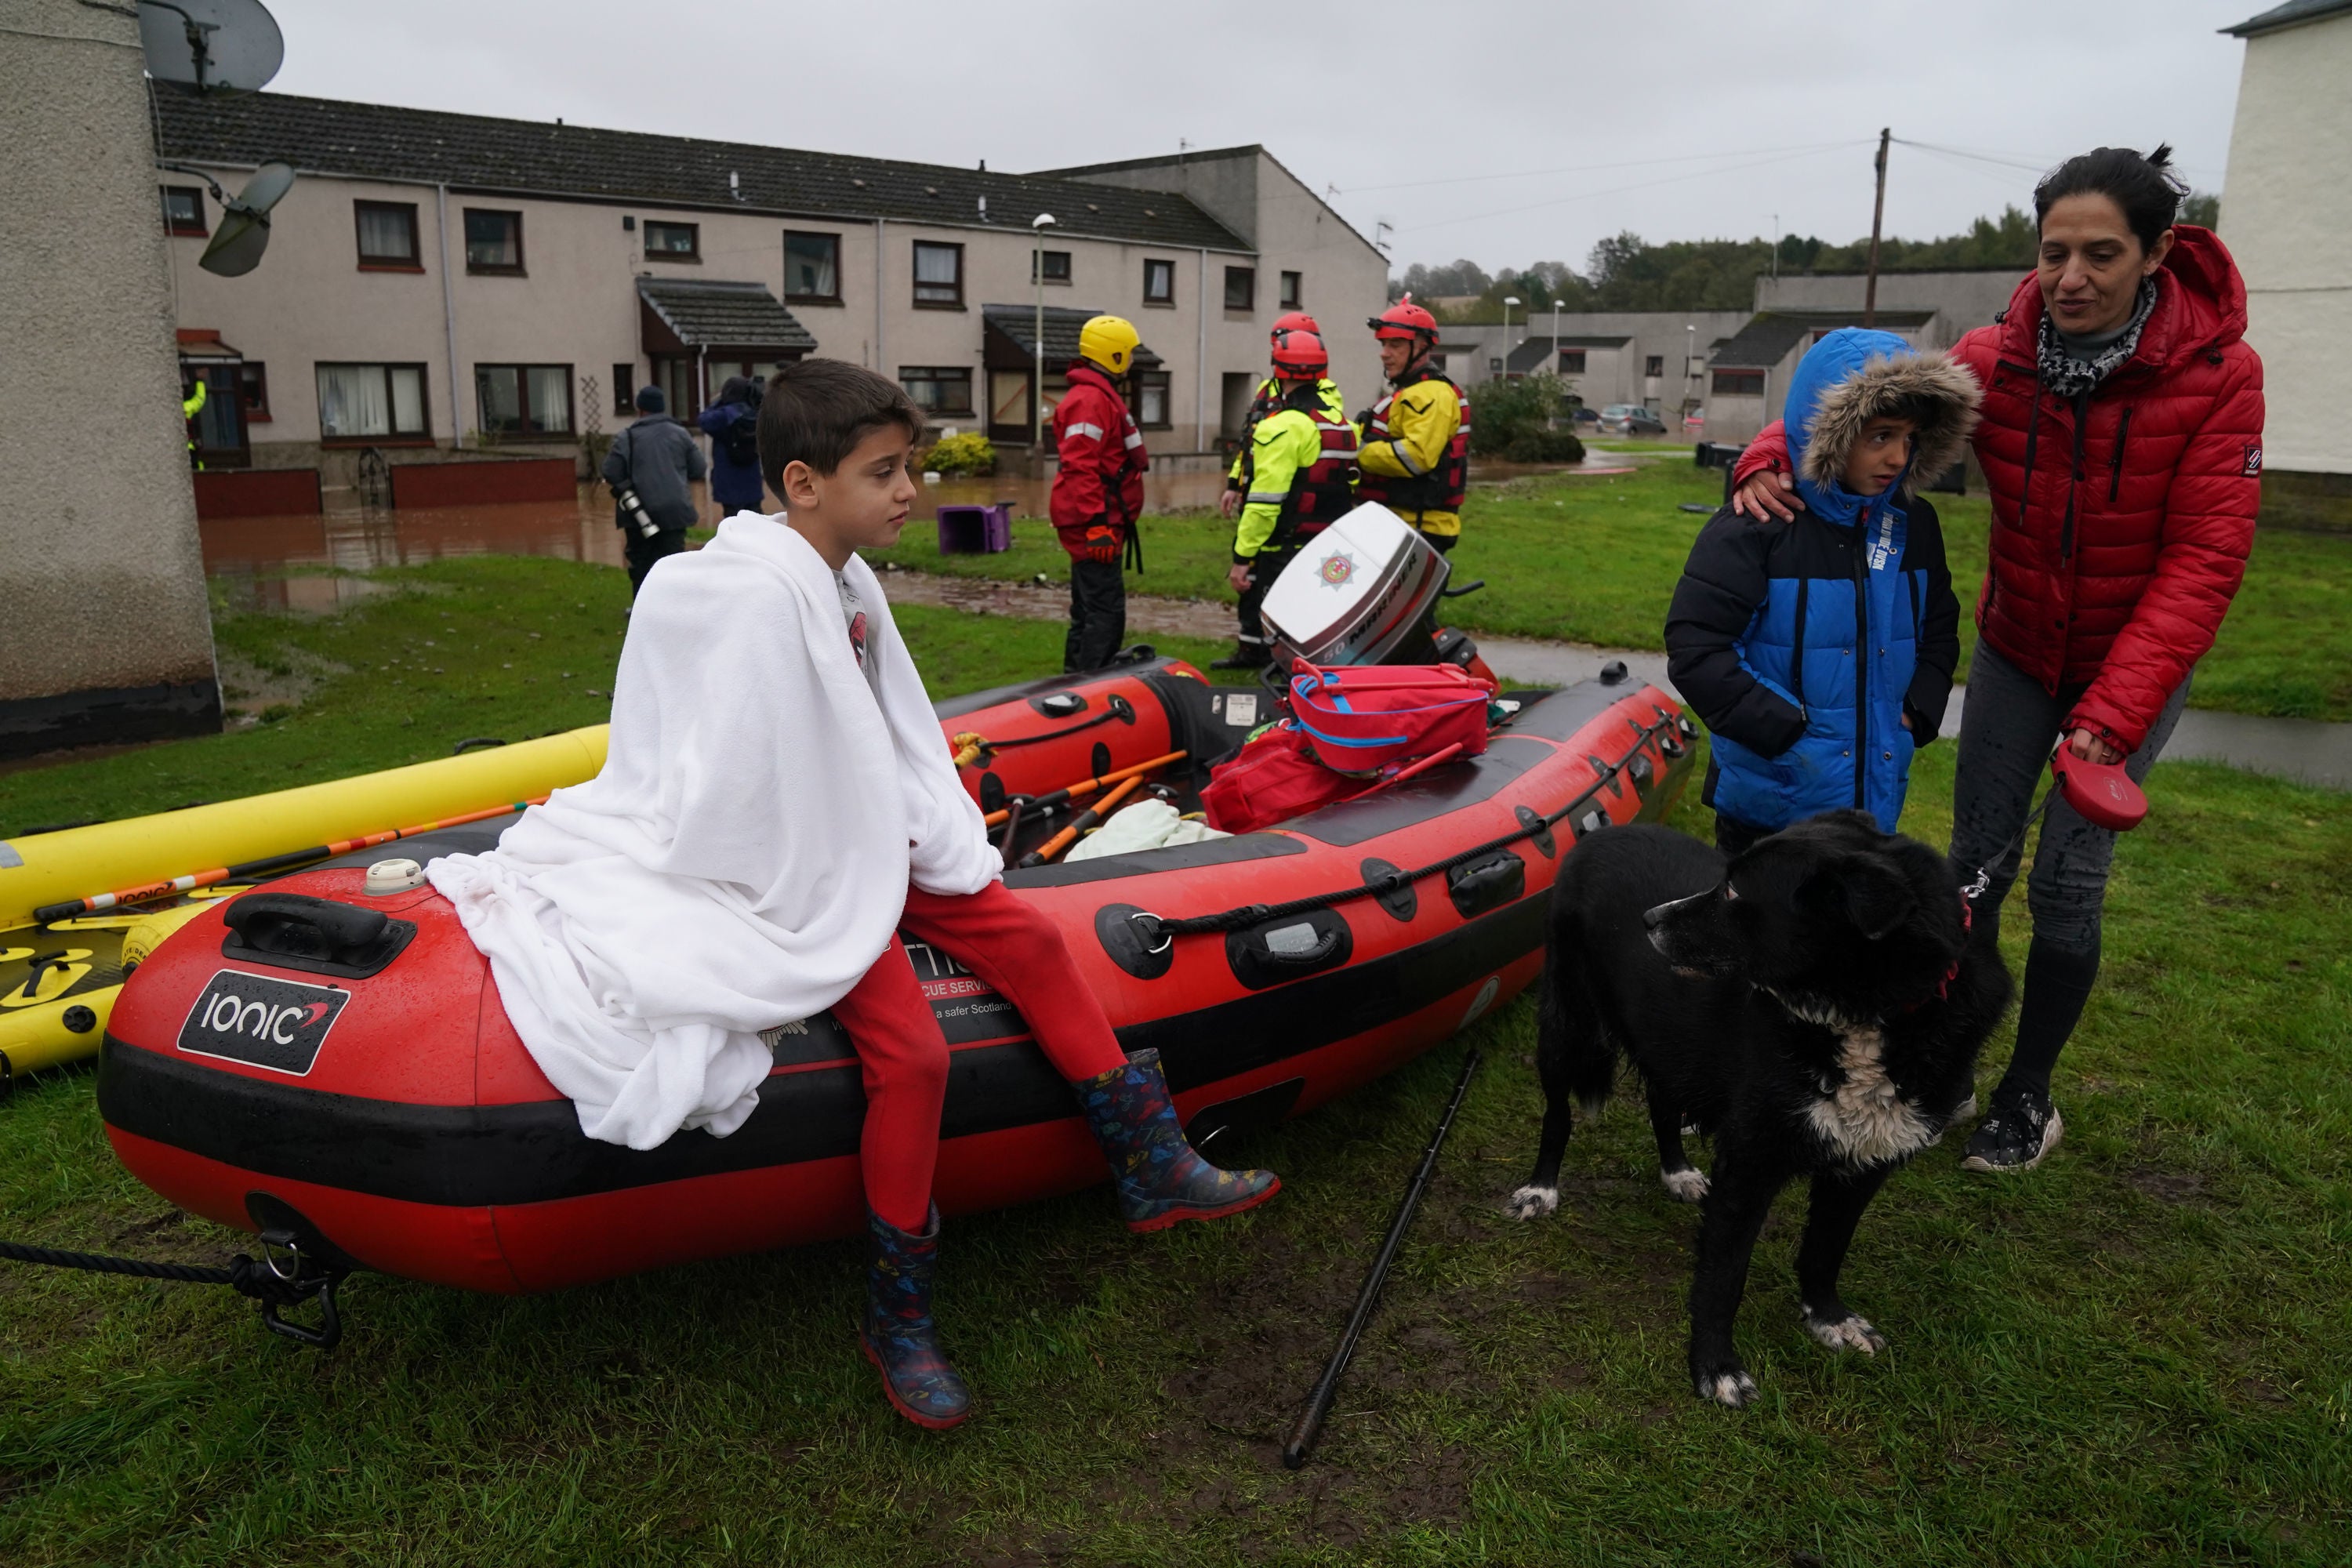 A boy sits on a rescue boat in Brechin, Scotland, which was flooded as torrential rain battered the town overnight